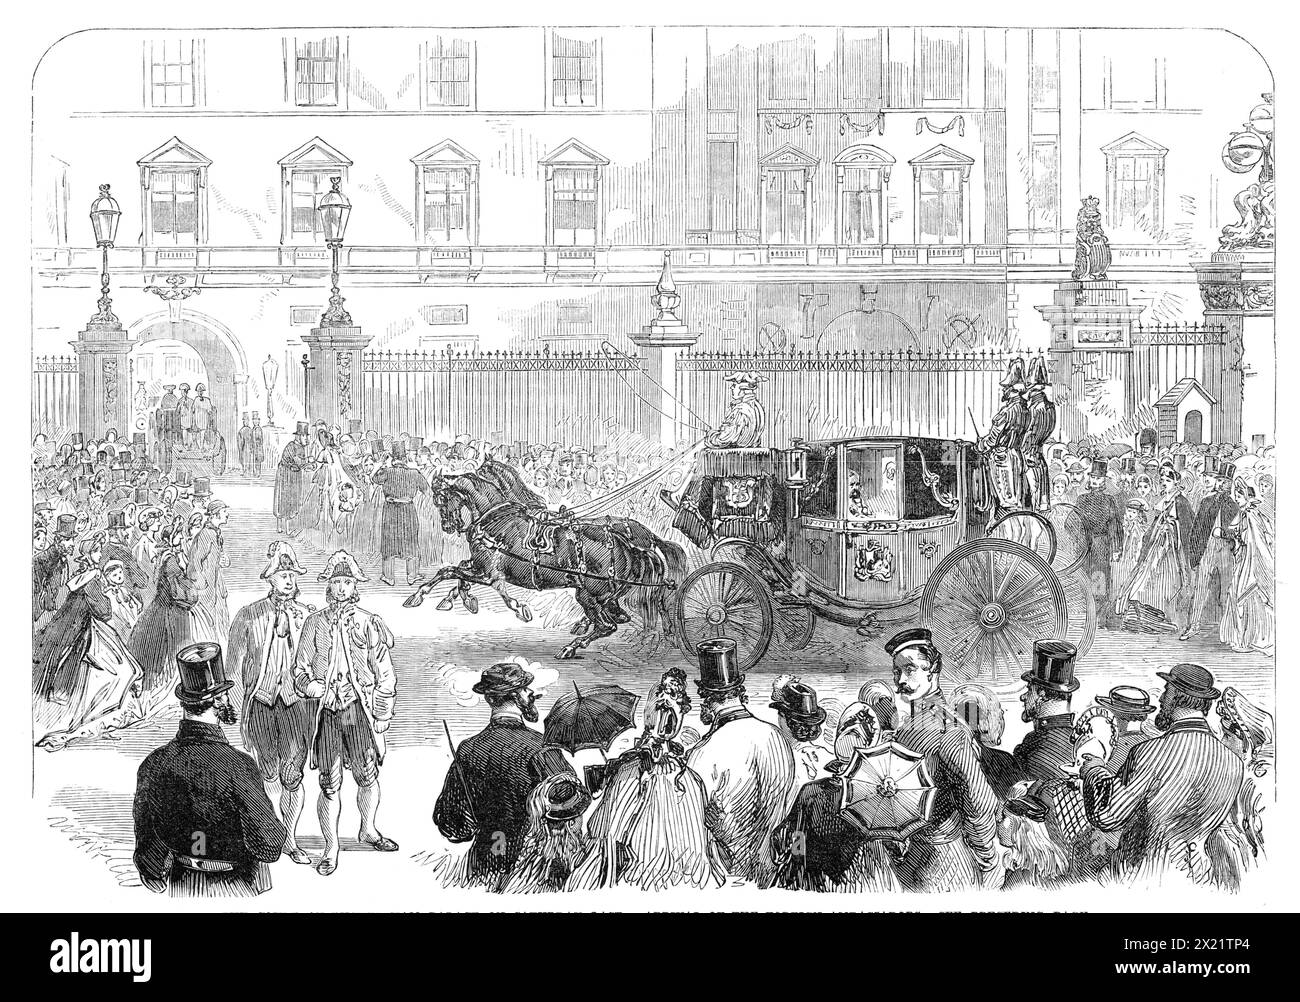 The Court at Buckingham Palace on Saturday last: arrival of the foreign ambassadors, 1864. 'As a memorial of the occasion, last Saturday, when our Queen, to the gratification of all her people, returned, in a manner, to public life by holding a Court at Buckingham Palace for the first time since her widowhood began, we have engraved a sketch of the arrival of the Corps Diplomatique at the gates of the palace. It is unnecessary that we should make any further remark upon a scene which is so familiar to Londoners during the accustomed season for the visits of her Majesty to this city. We can but Stock Photo